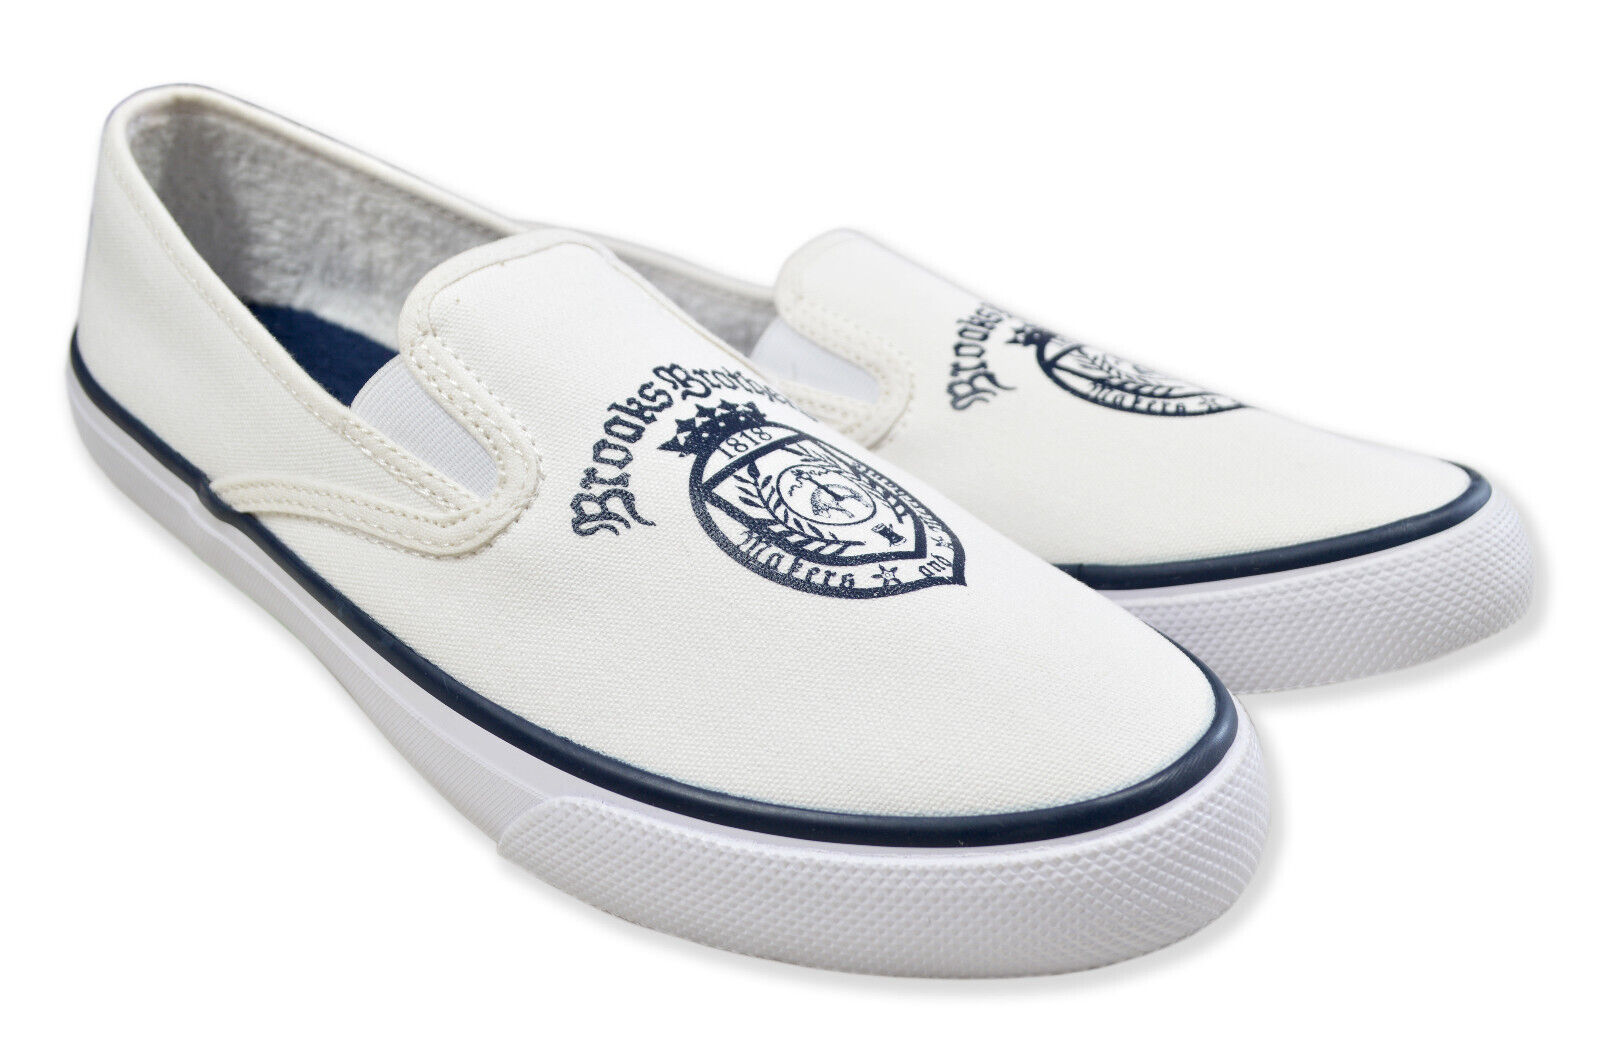 Primary image for Brooks Brothers Sperry White & Navy Crest Canvas Slip On Sneakers, 11 M 8416-9